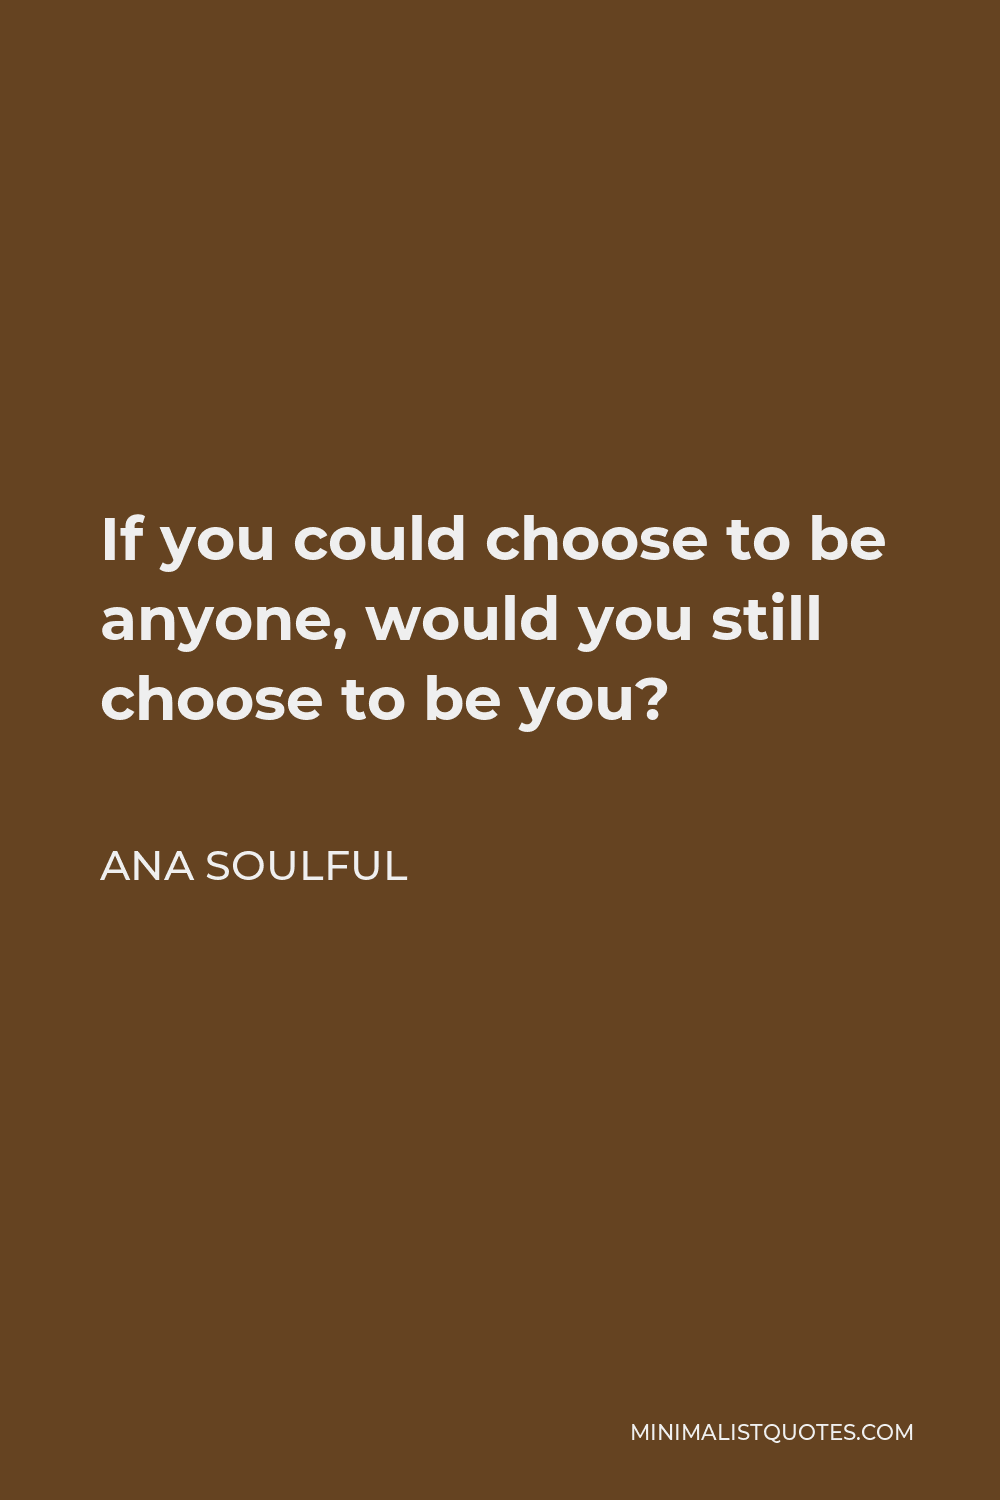 Ana Soulful Quote - If you could choose to be anyone, would you still choose to be you?